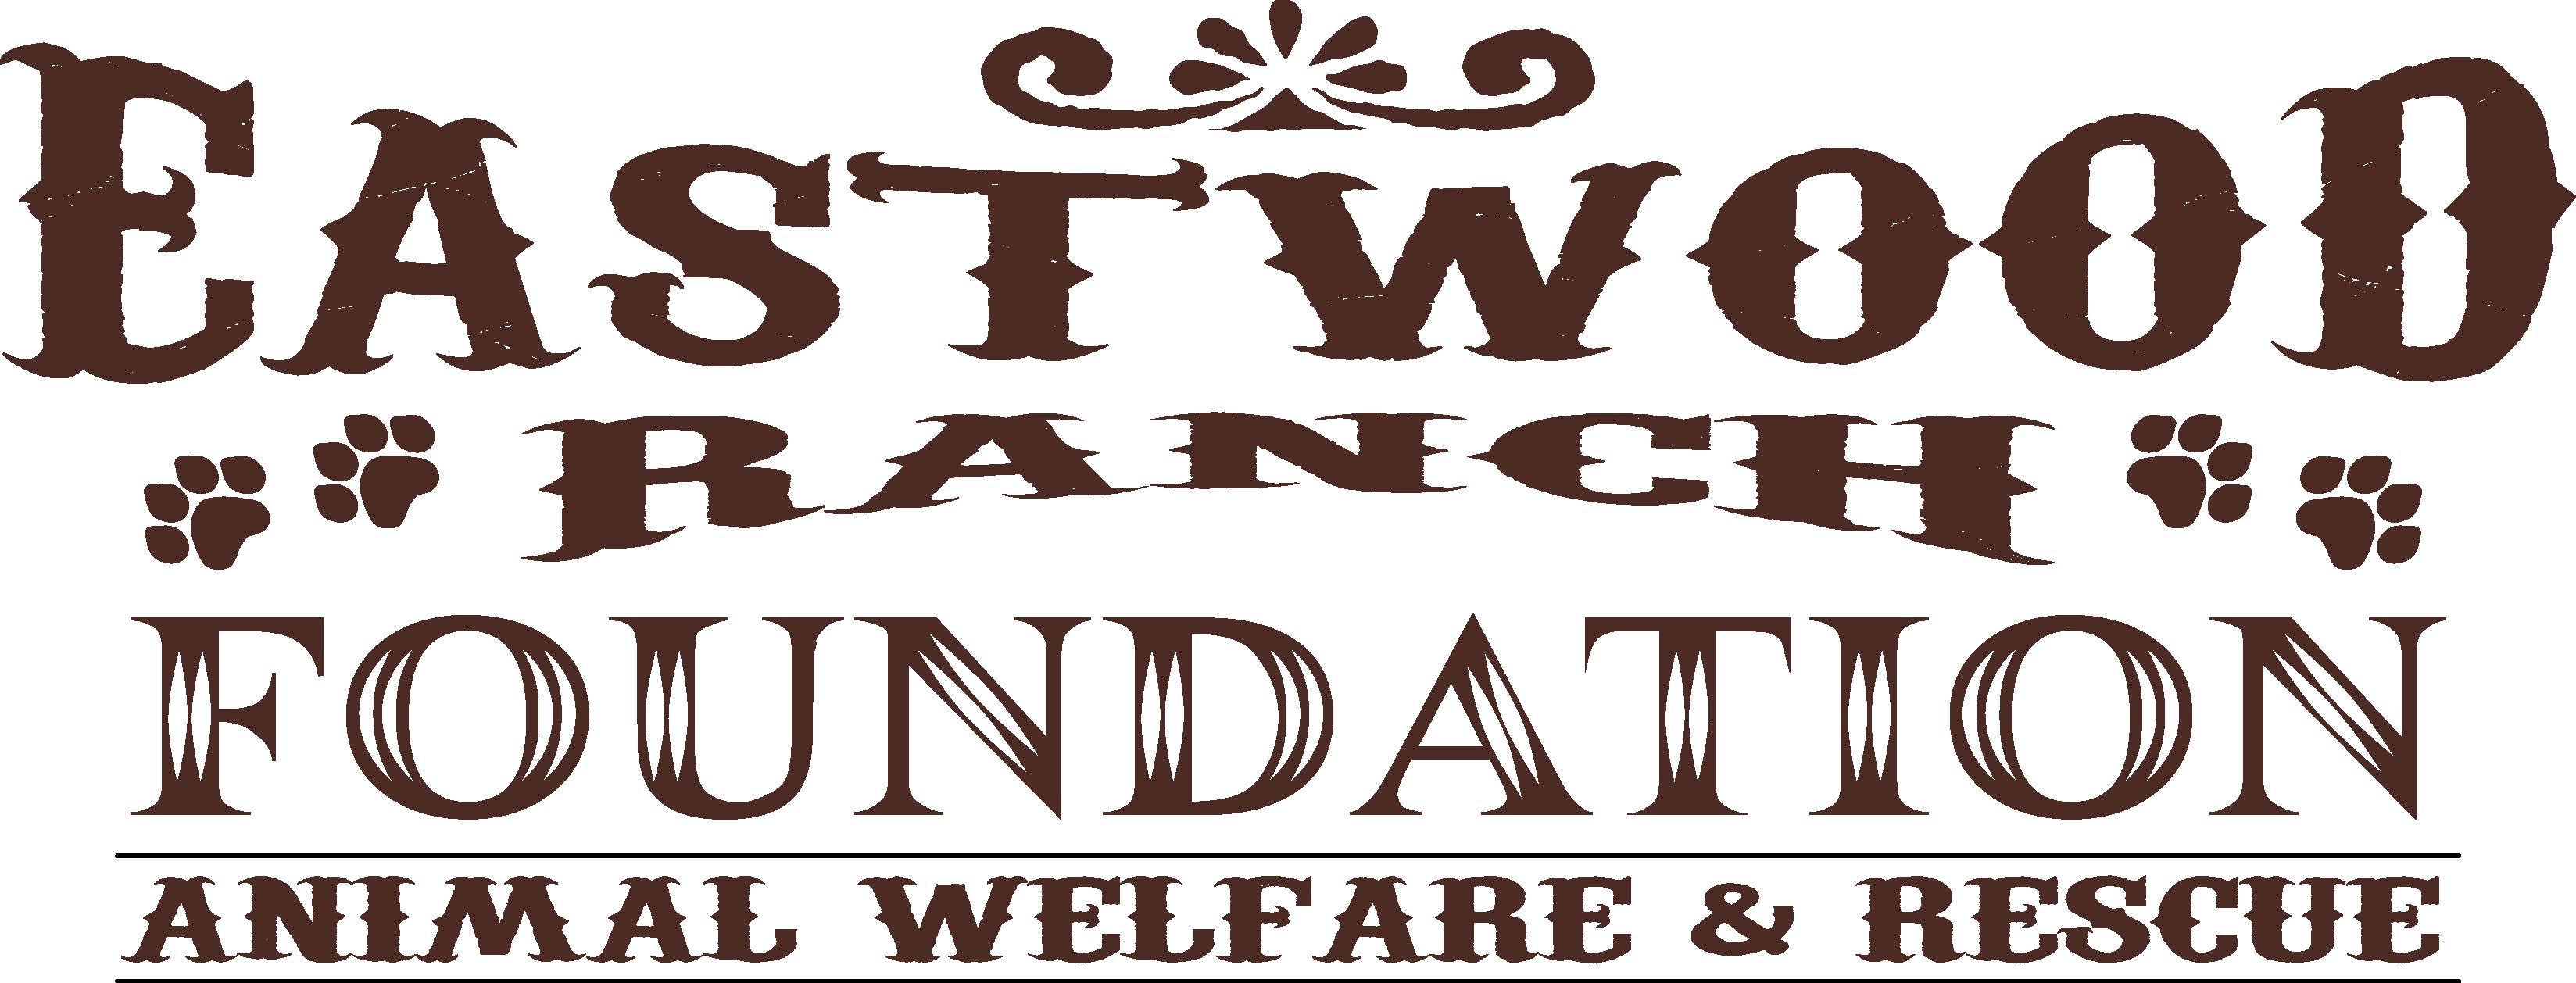 Eastwood Ranch Foundation